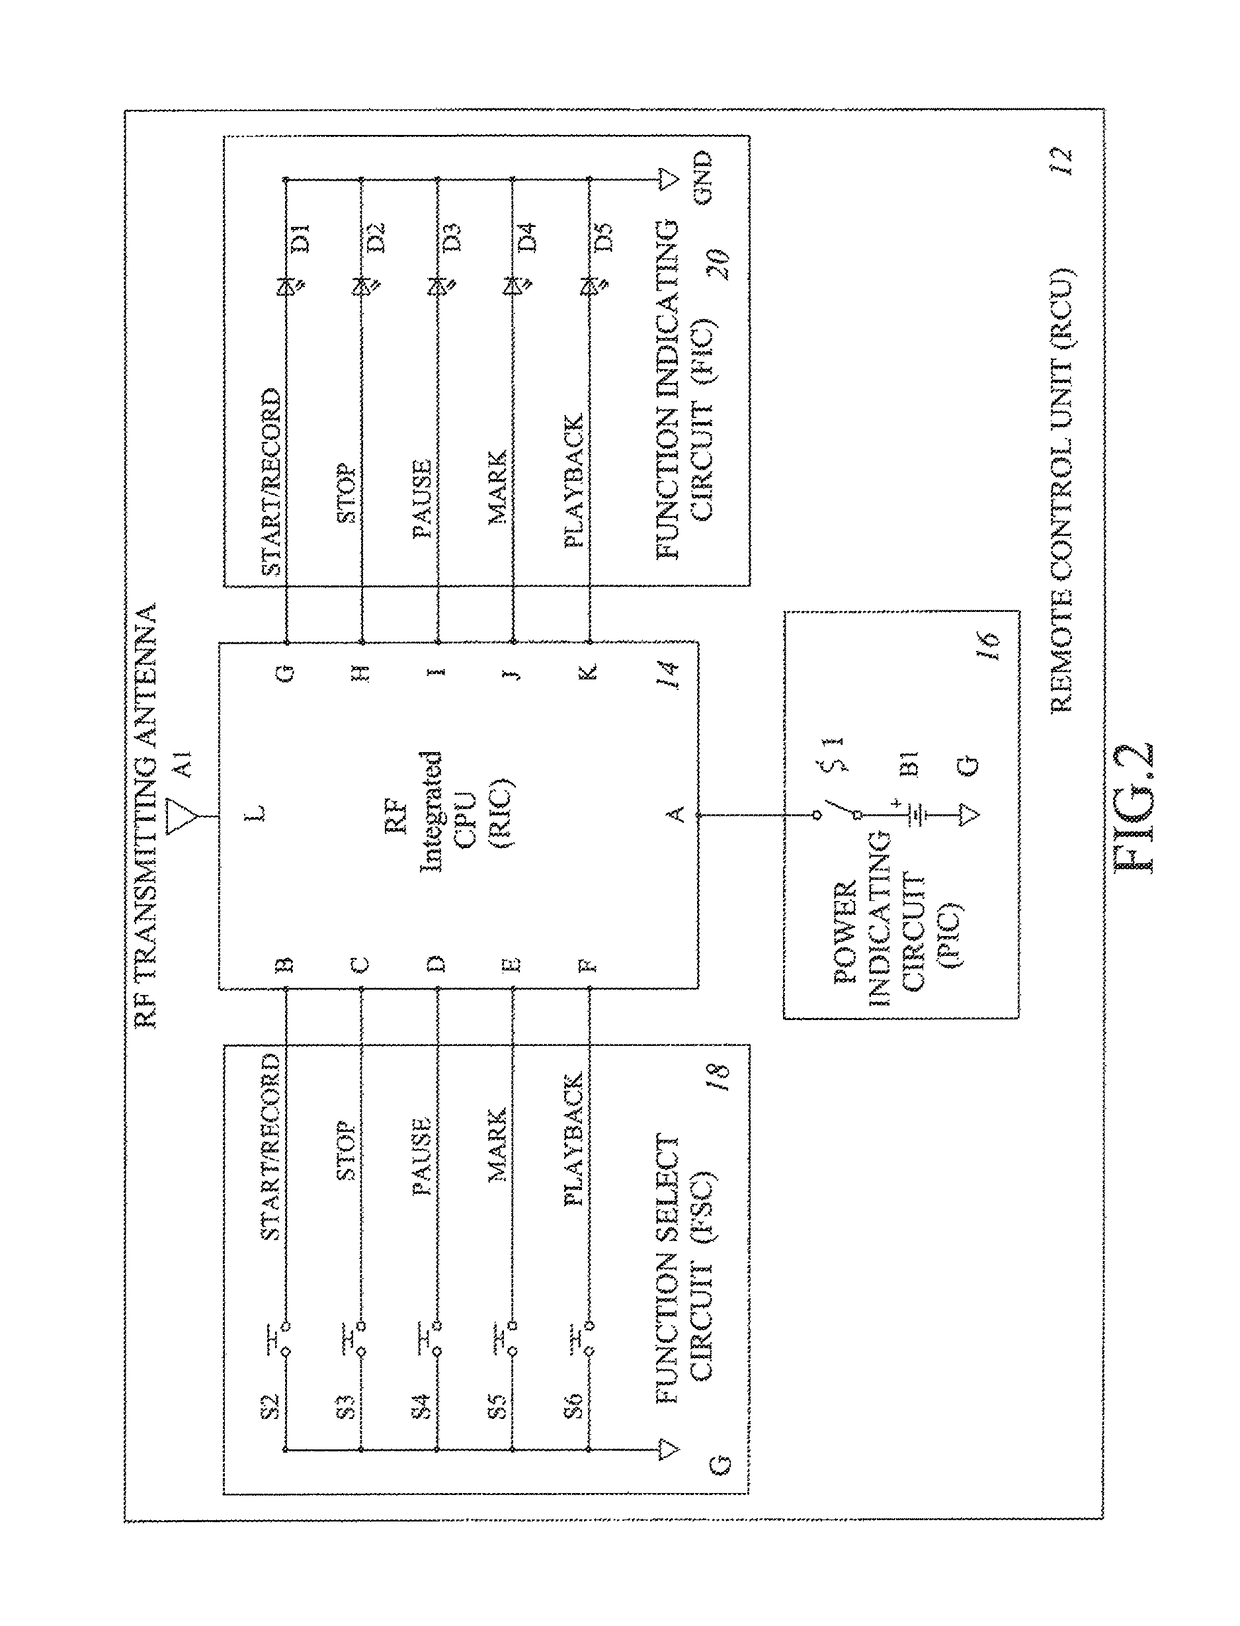 Remotely controlled audio and video recording system